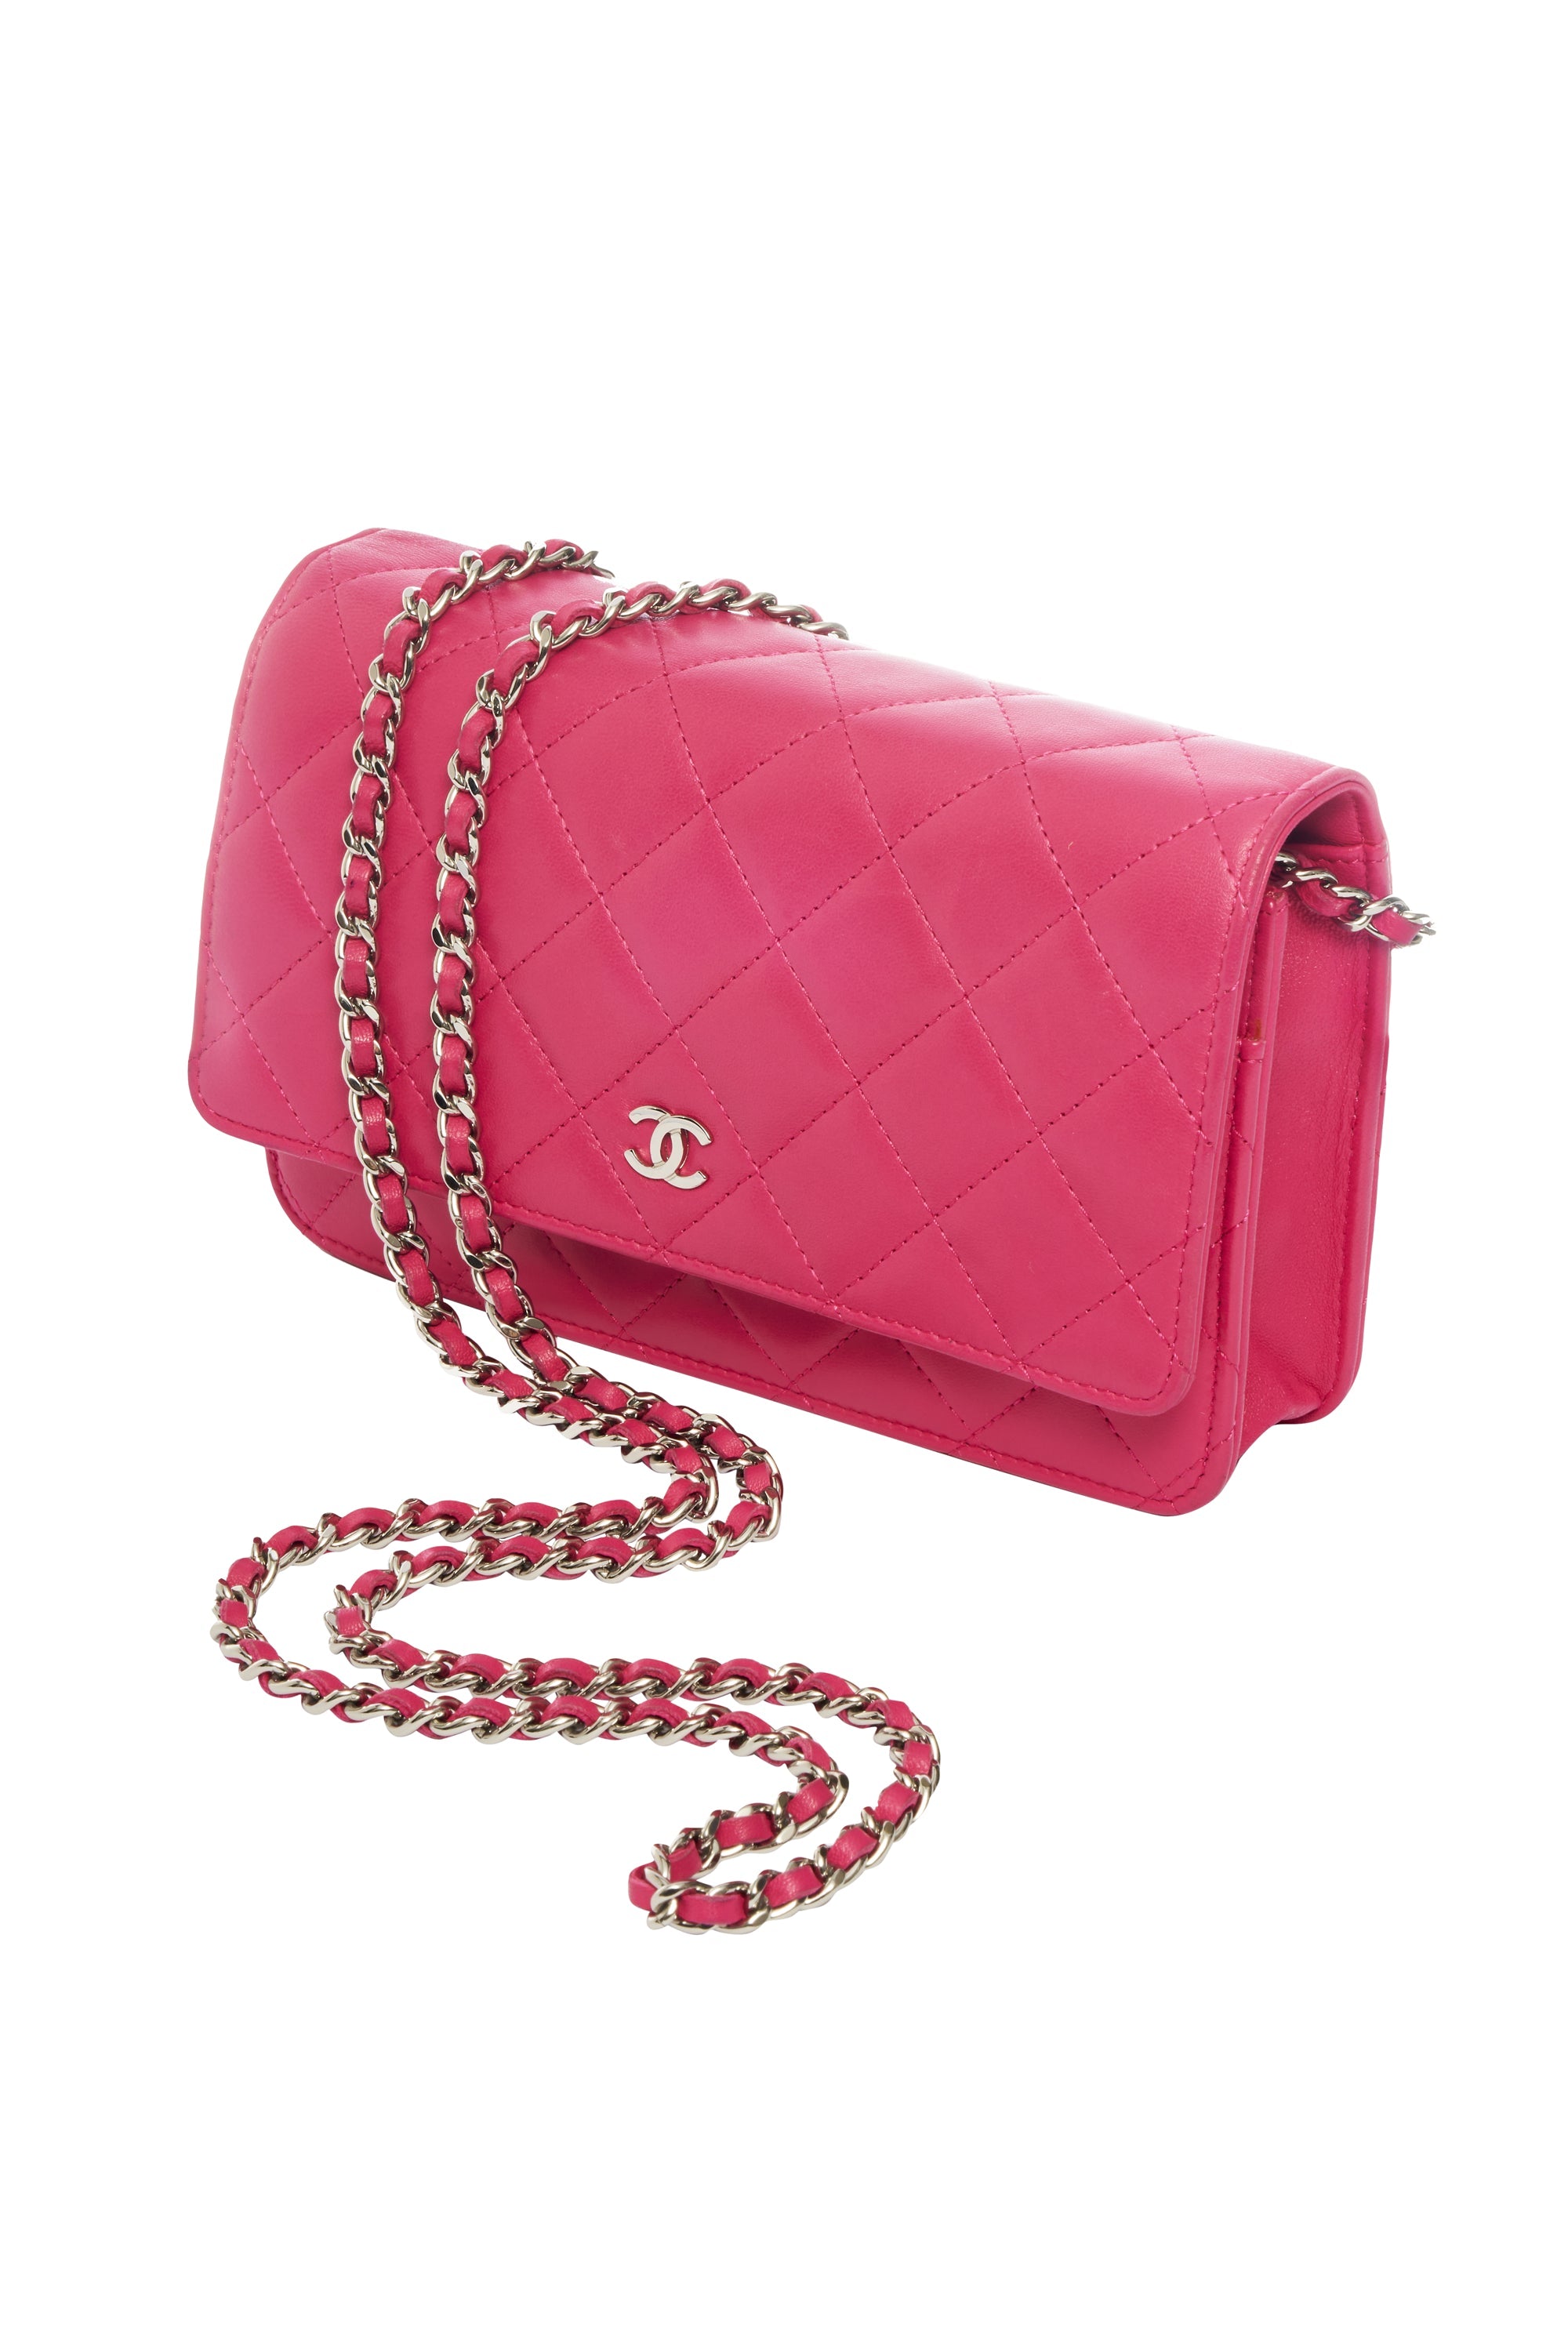 Chanel Pink Quilted Wallet on a Chain 2014 - Foxy Couture Carmel